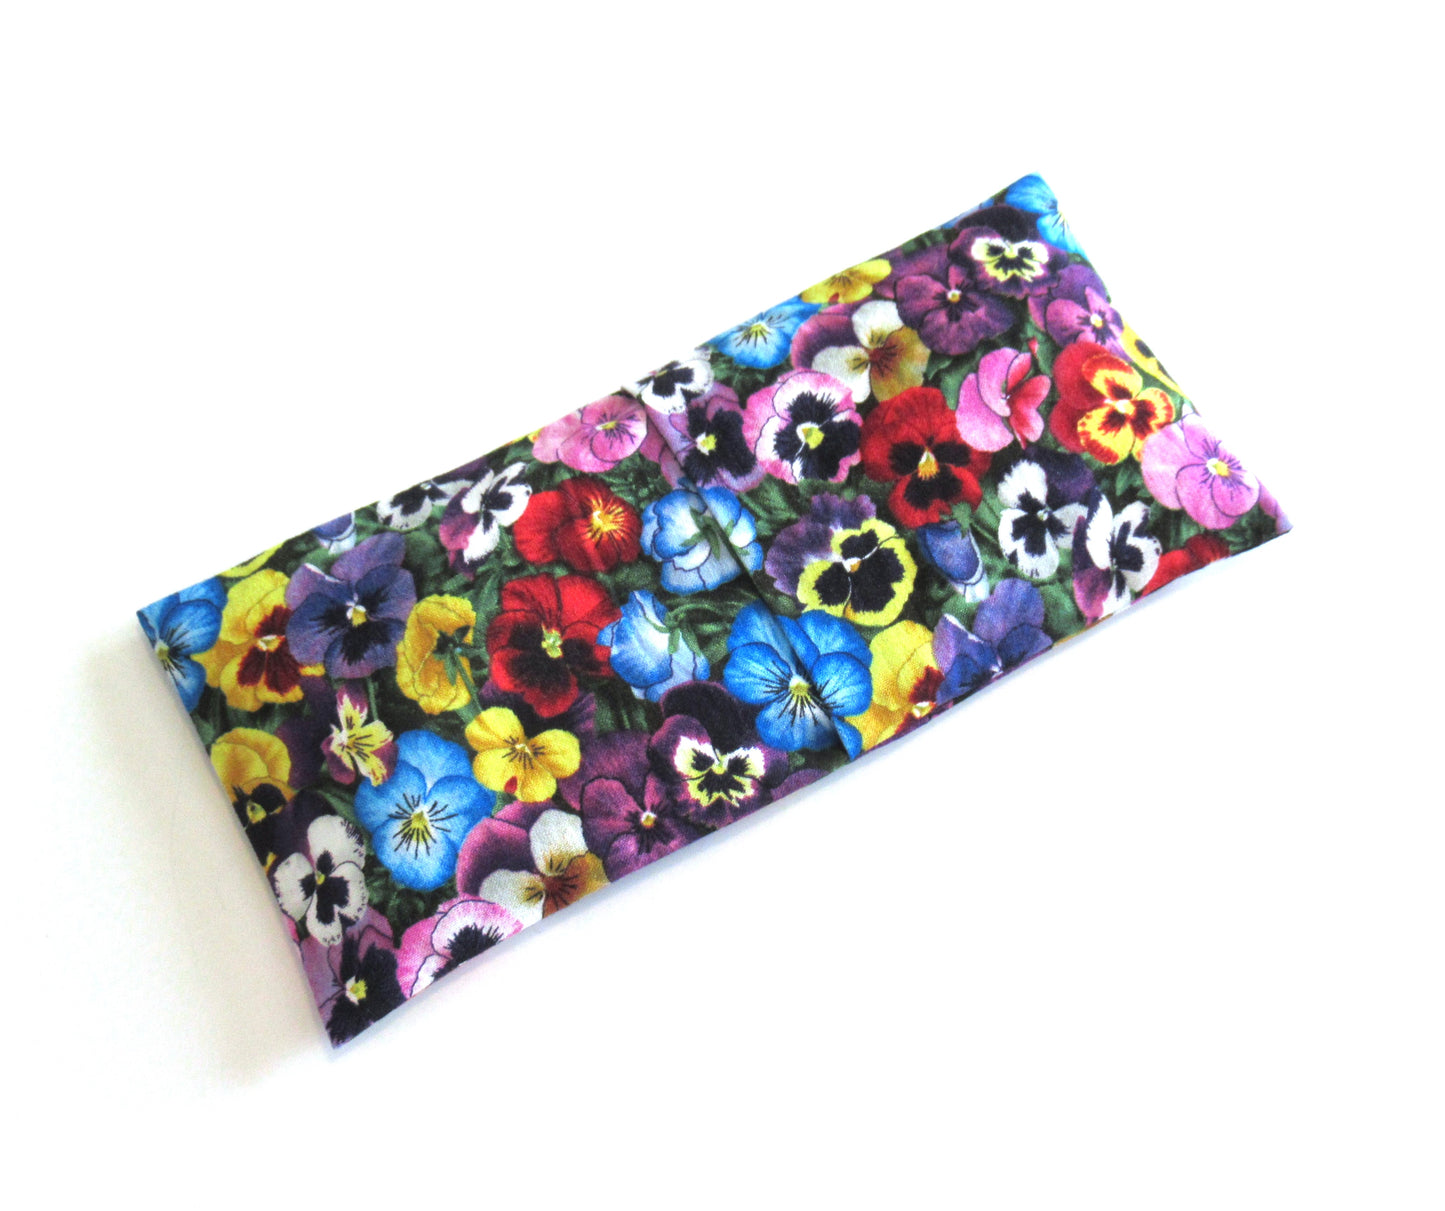 Eye Pillow - Unscented Eye Pillow - Therapeutic Eye Pillow - Acupressure Eye Pillow - Yoga Eye Pillow (Relax & Refresh)